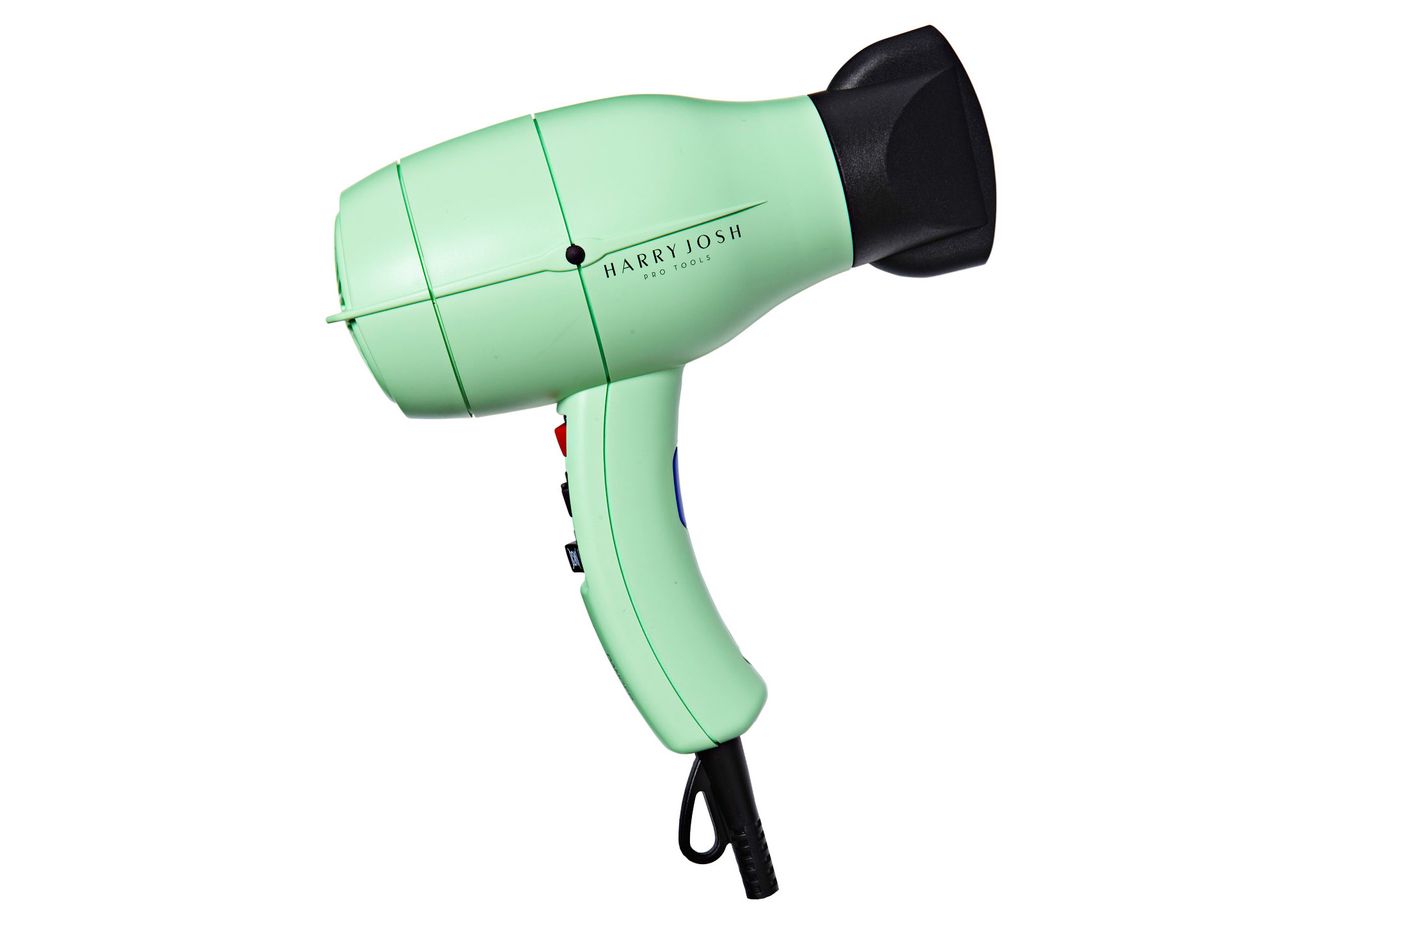 Parlux 3500 Blow Dryer And Hair Dryer Review 2018